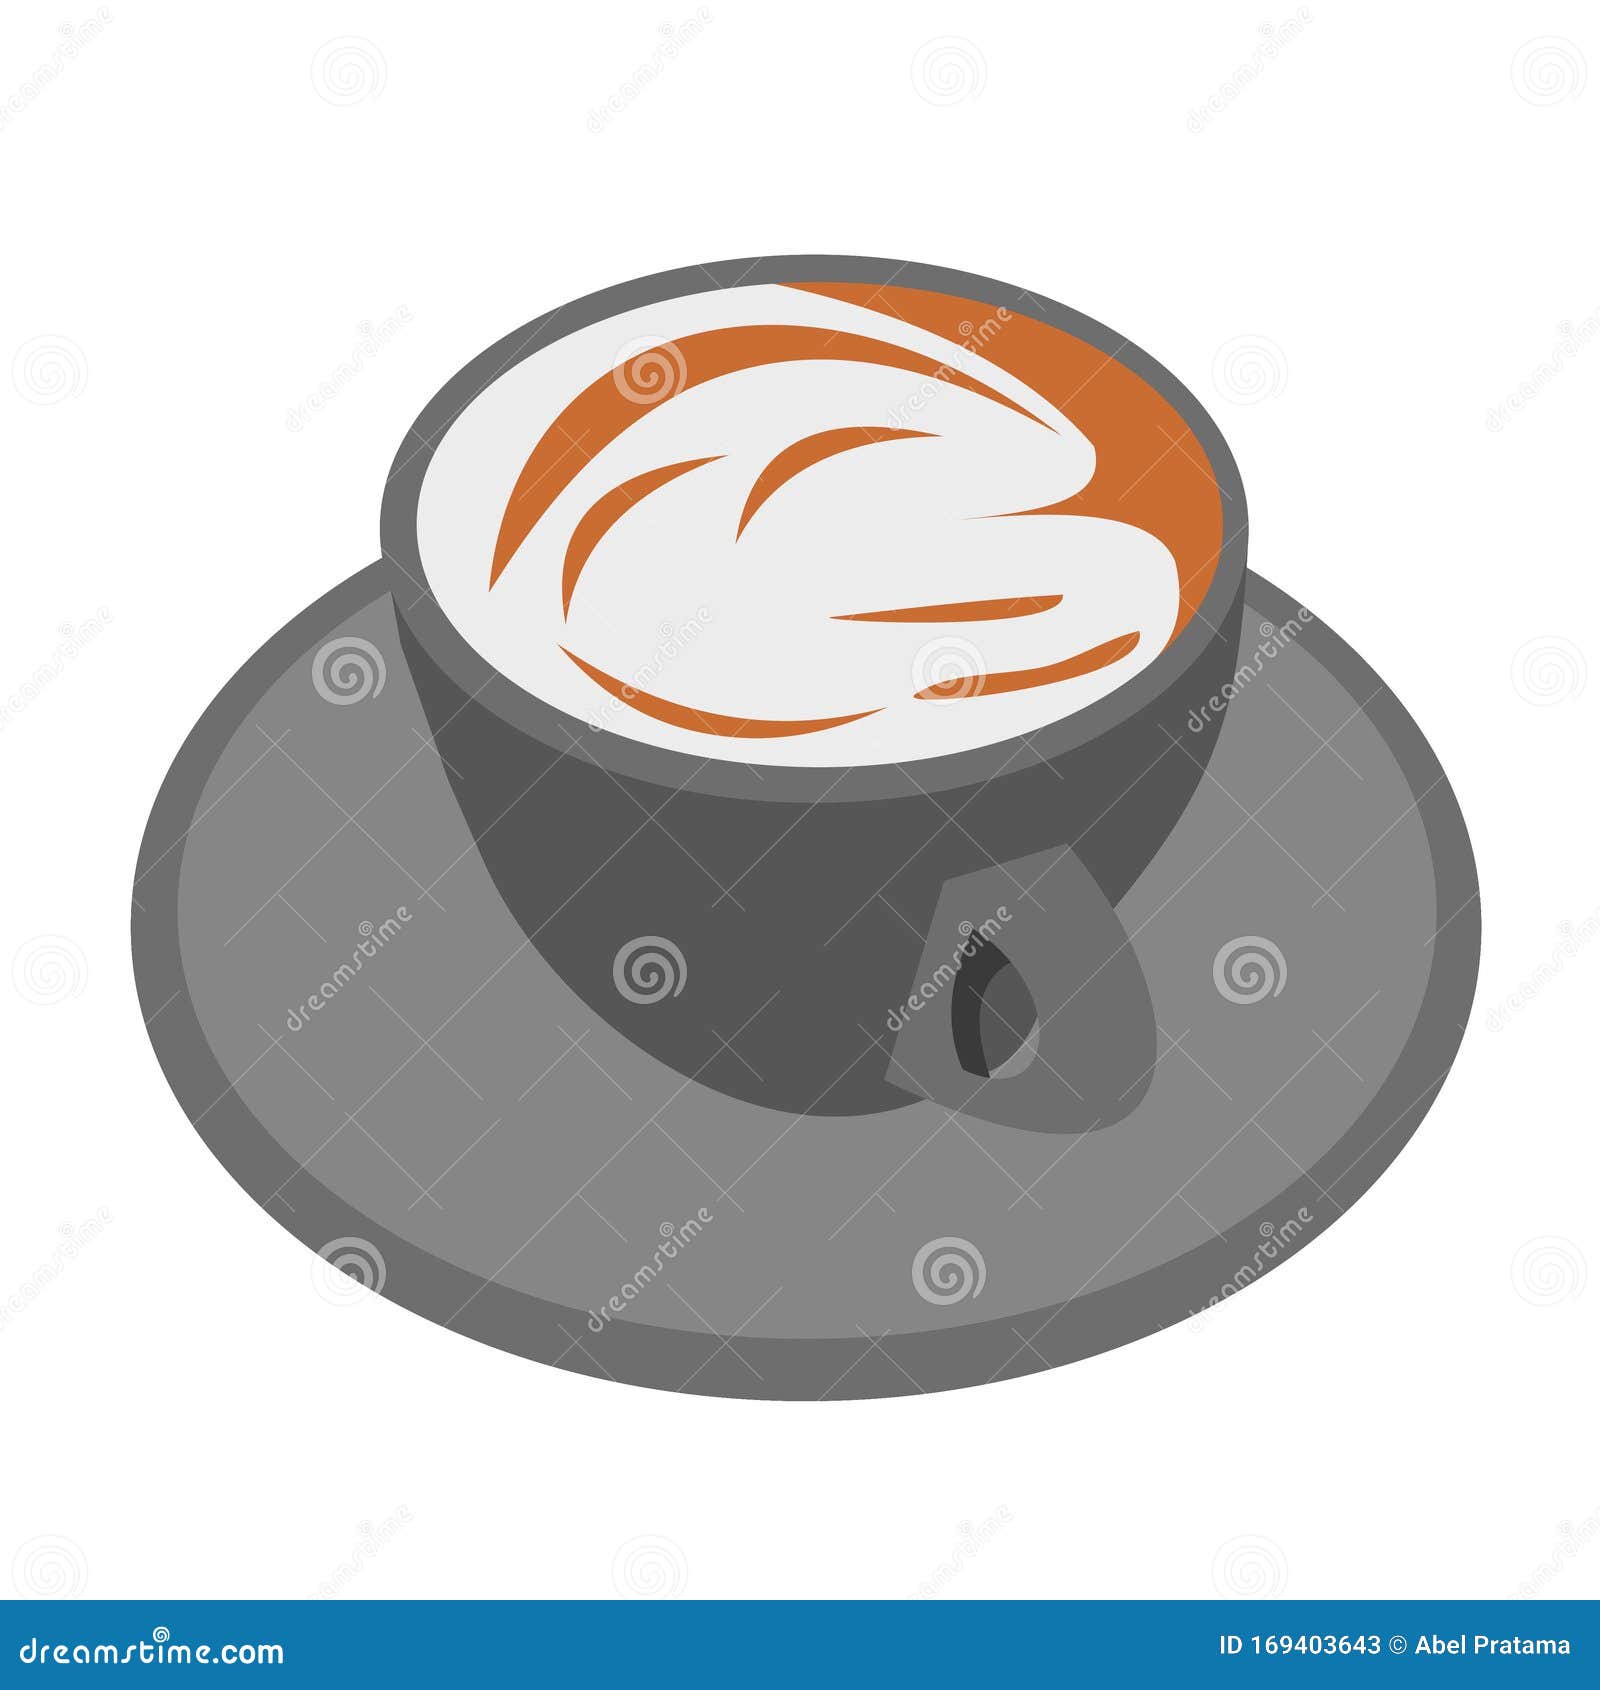 cup of coffee template logo 